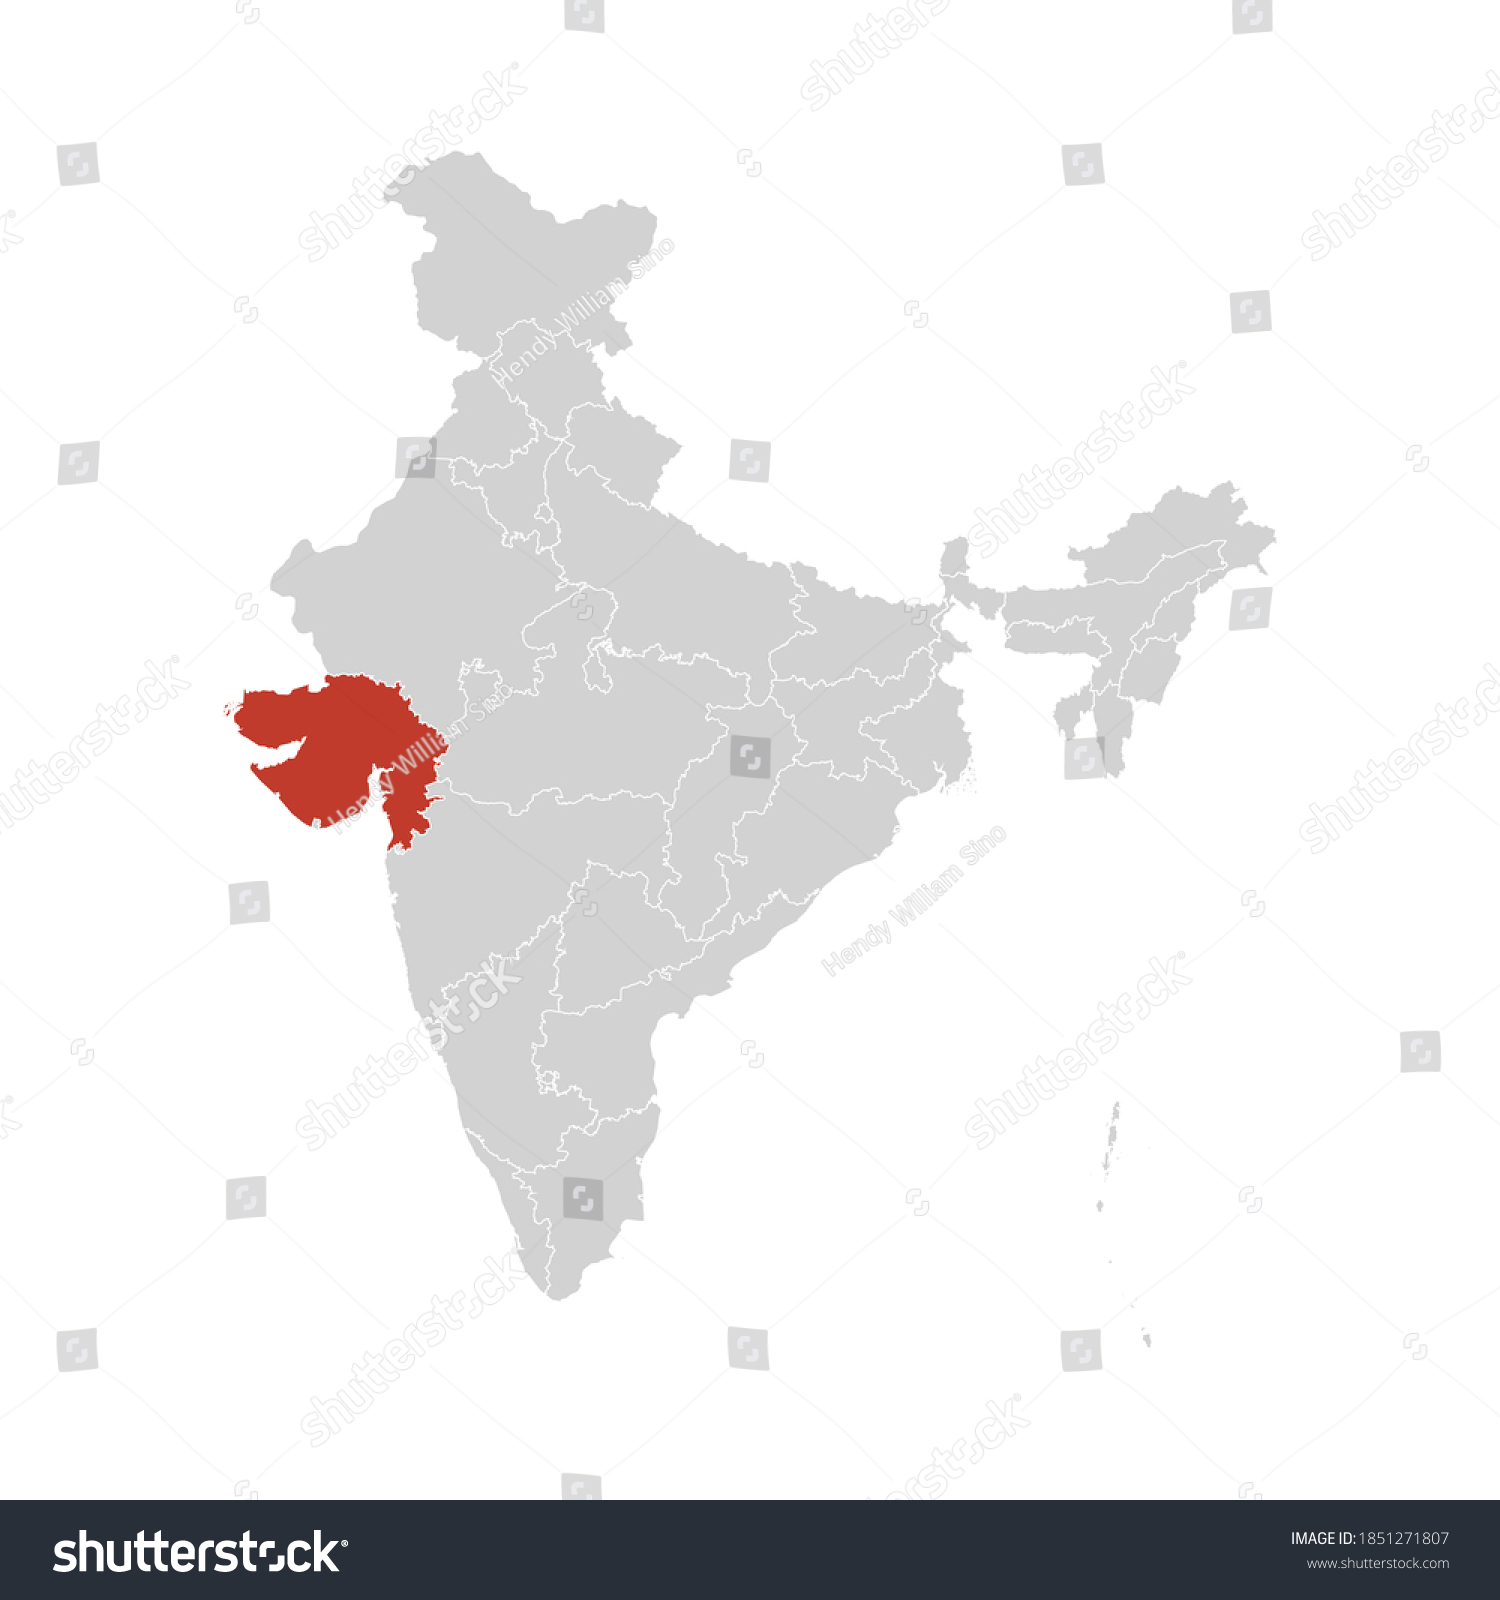 Gujarat Highlighted On India Map Eps Stock Vector (Royalty Free ...